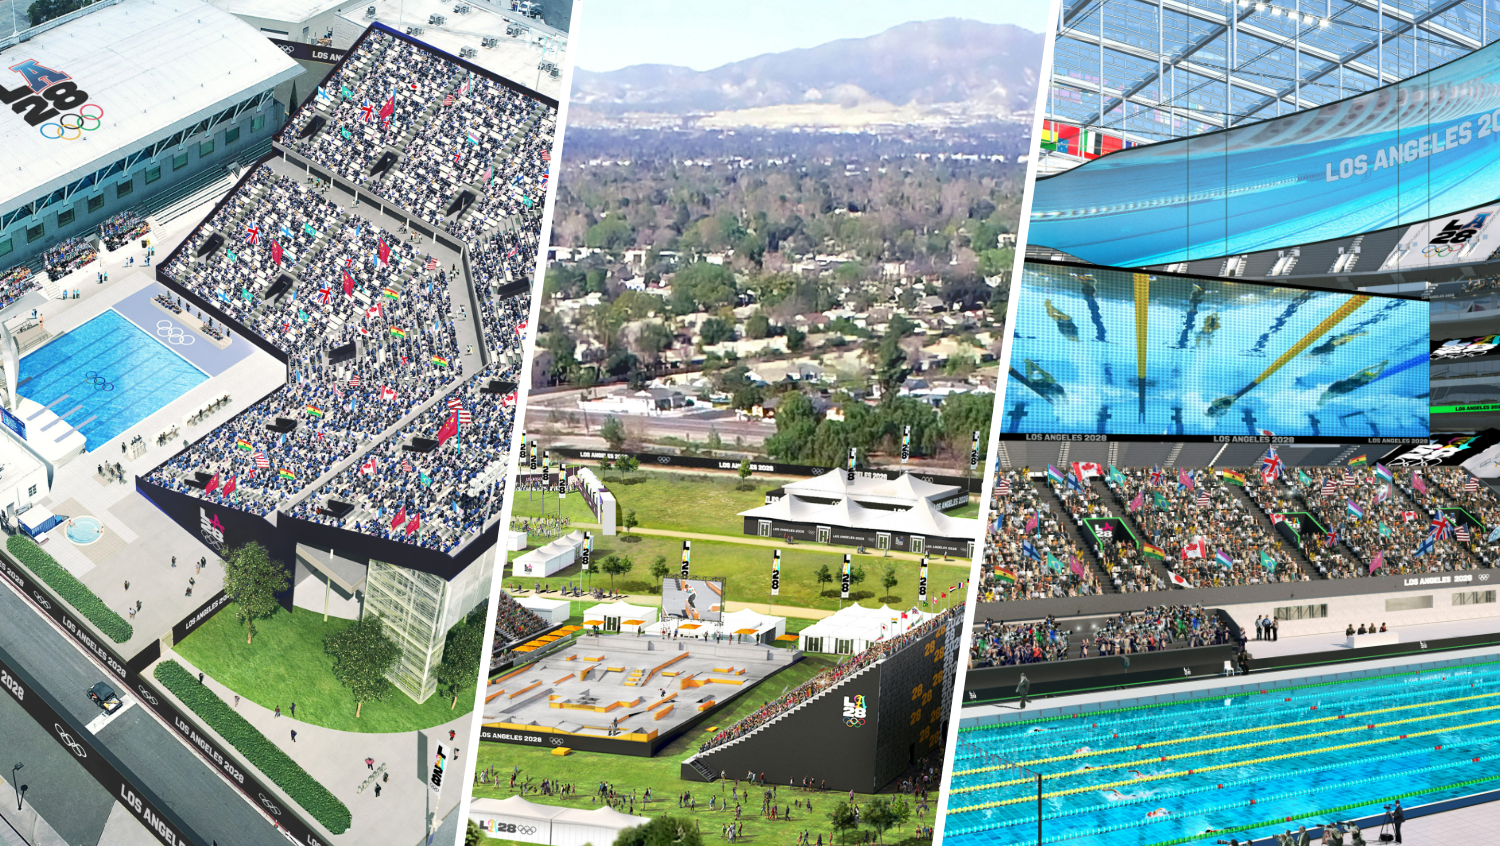 Images: See venues planned for the 2028 Los Angeles Olympics